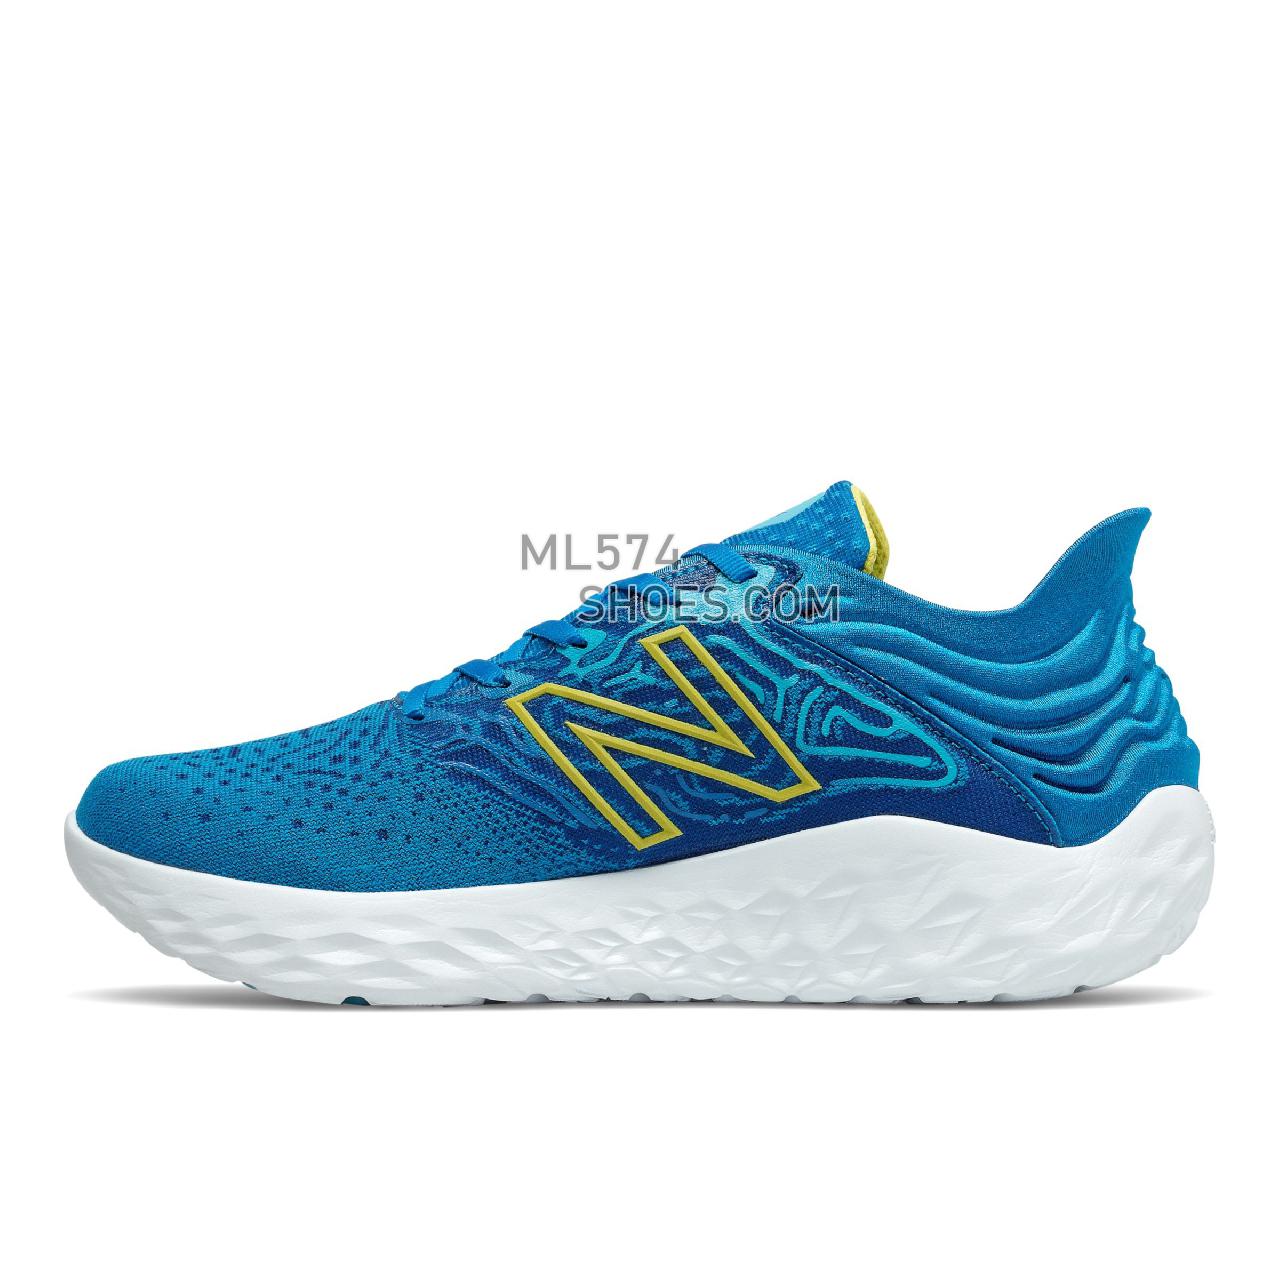 New Balance Fresh Foam Beacon v3 - Men's Neutral Running - Wave with Citra Yellow - MBECNCB3